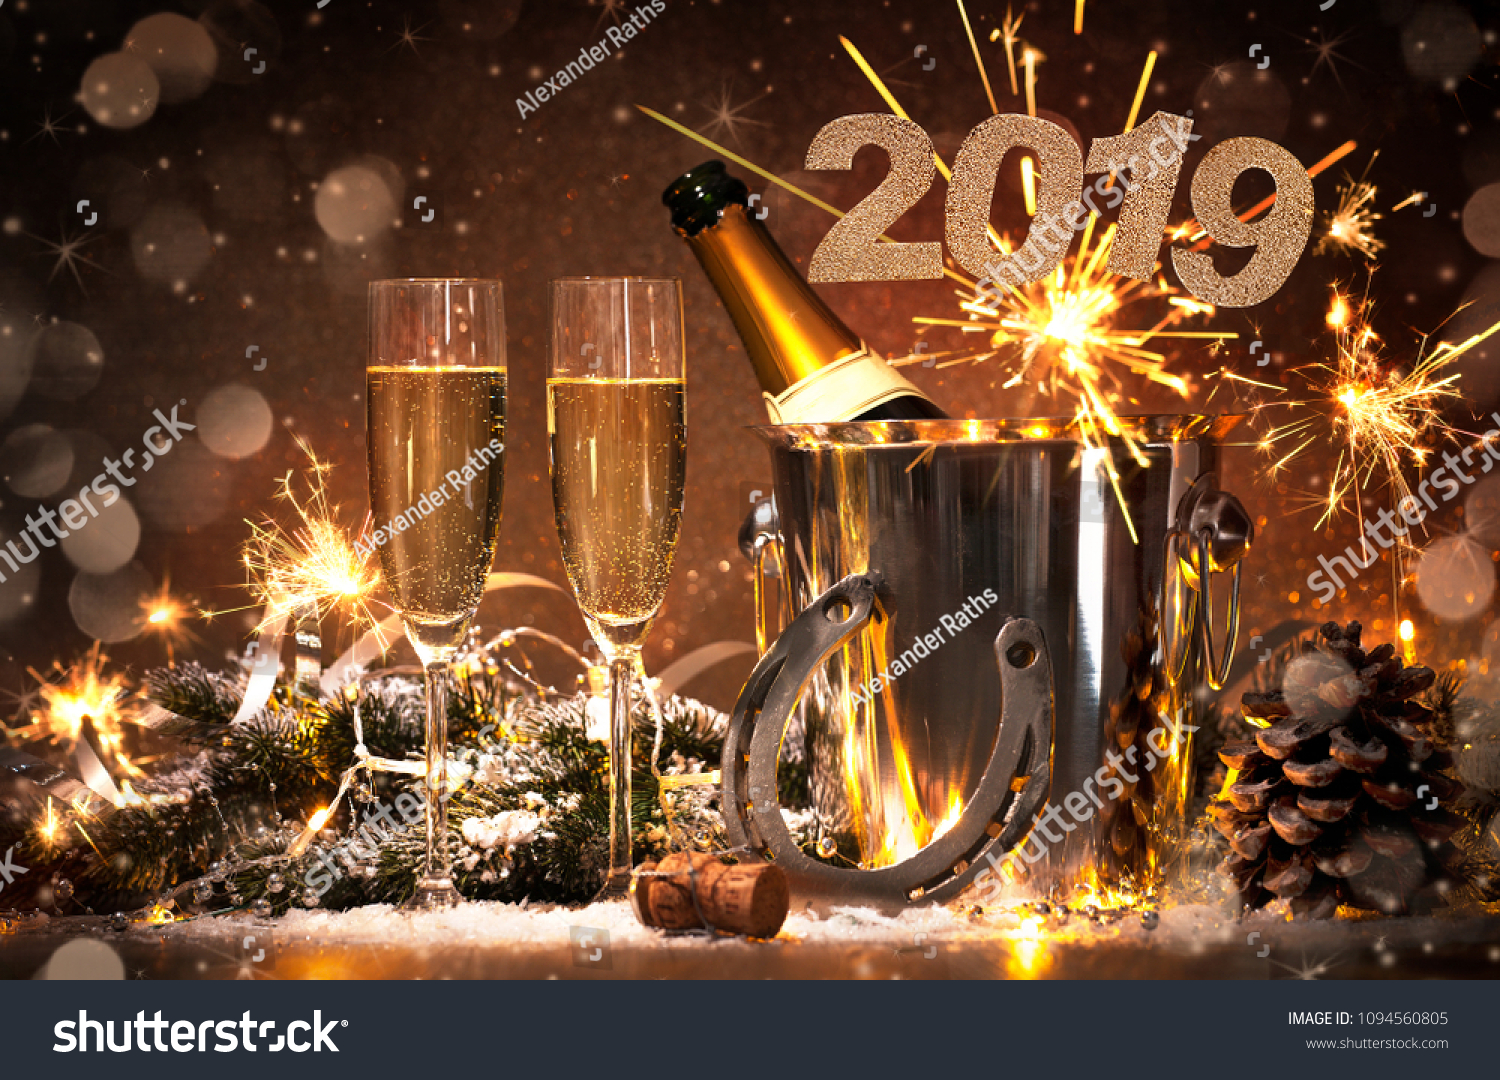 New Years Eve celebration background with pair of flutes and bottle of champagne in  bucket  and a horseshoe as lucky charm #1094560805